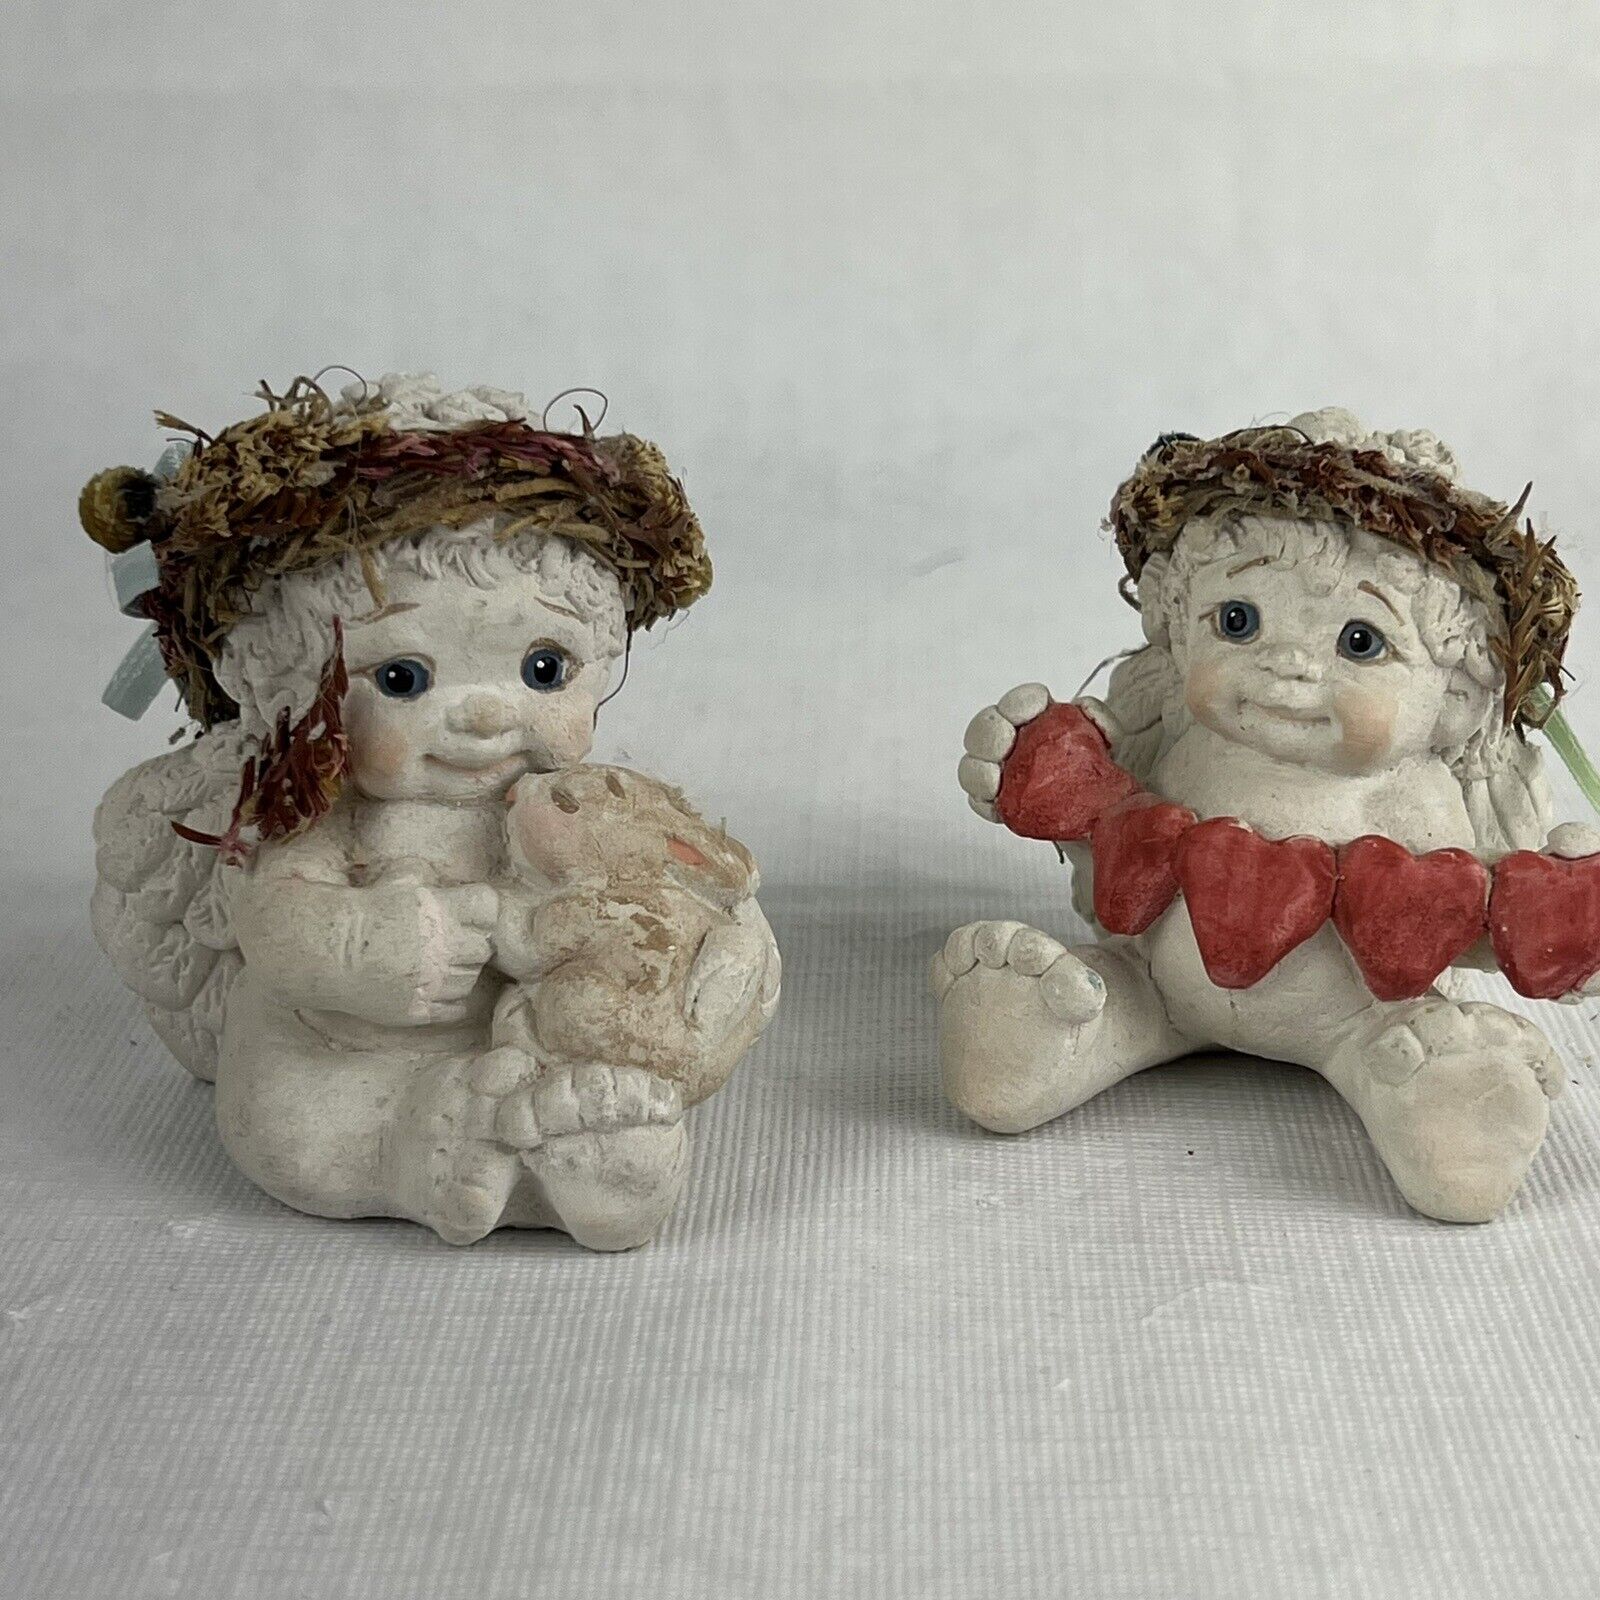 Cast Art Dreamsicles 1994 Heartstrings Cherub With Bunny Lot Of Two Small